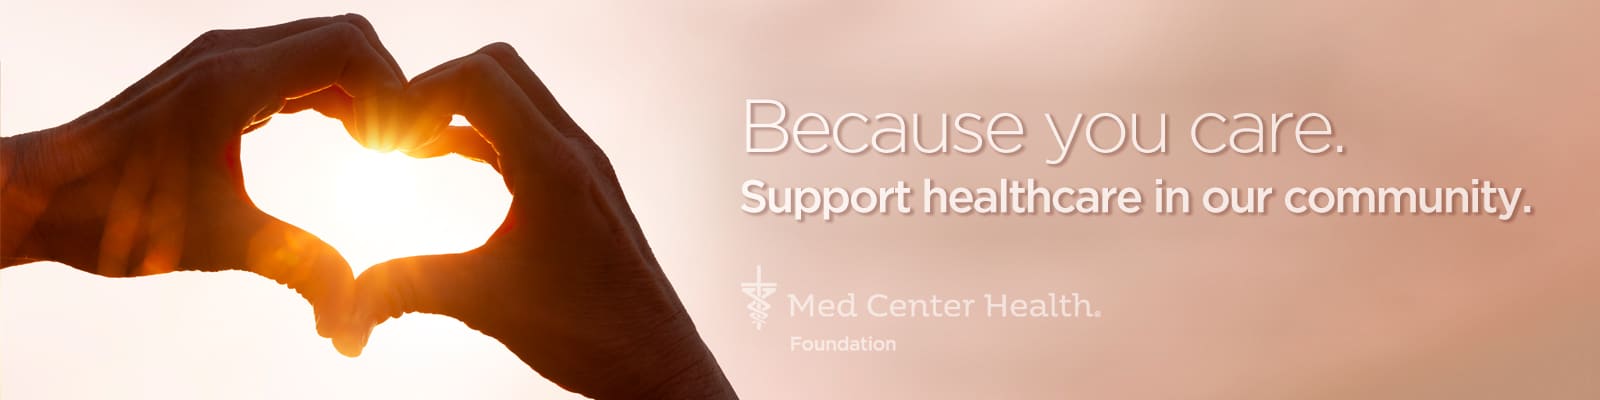 Because you care. Support healthcare in our community.